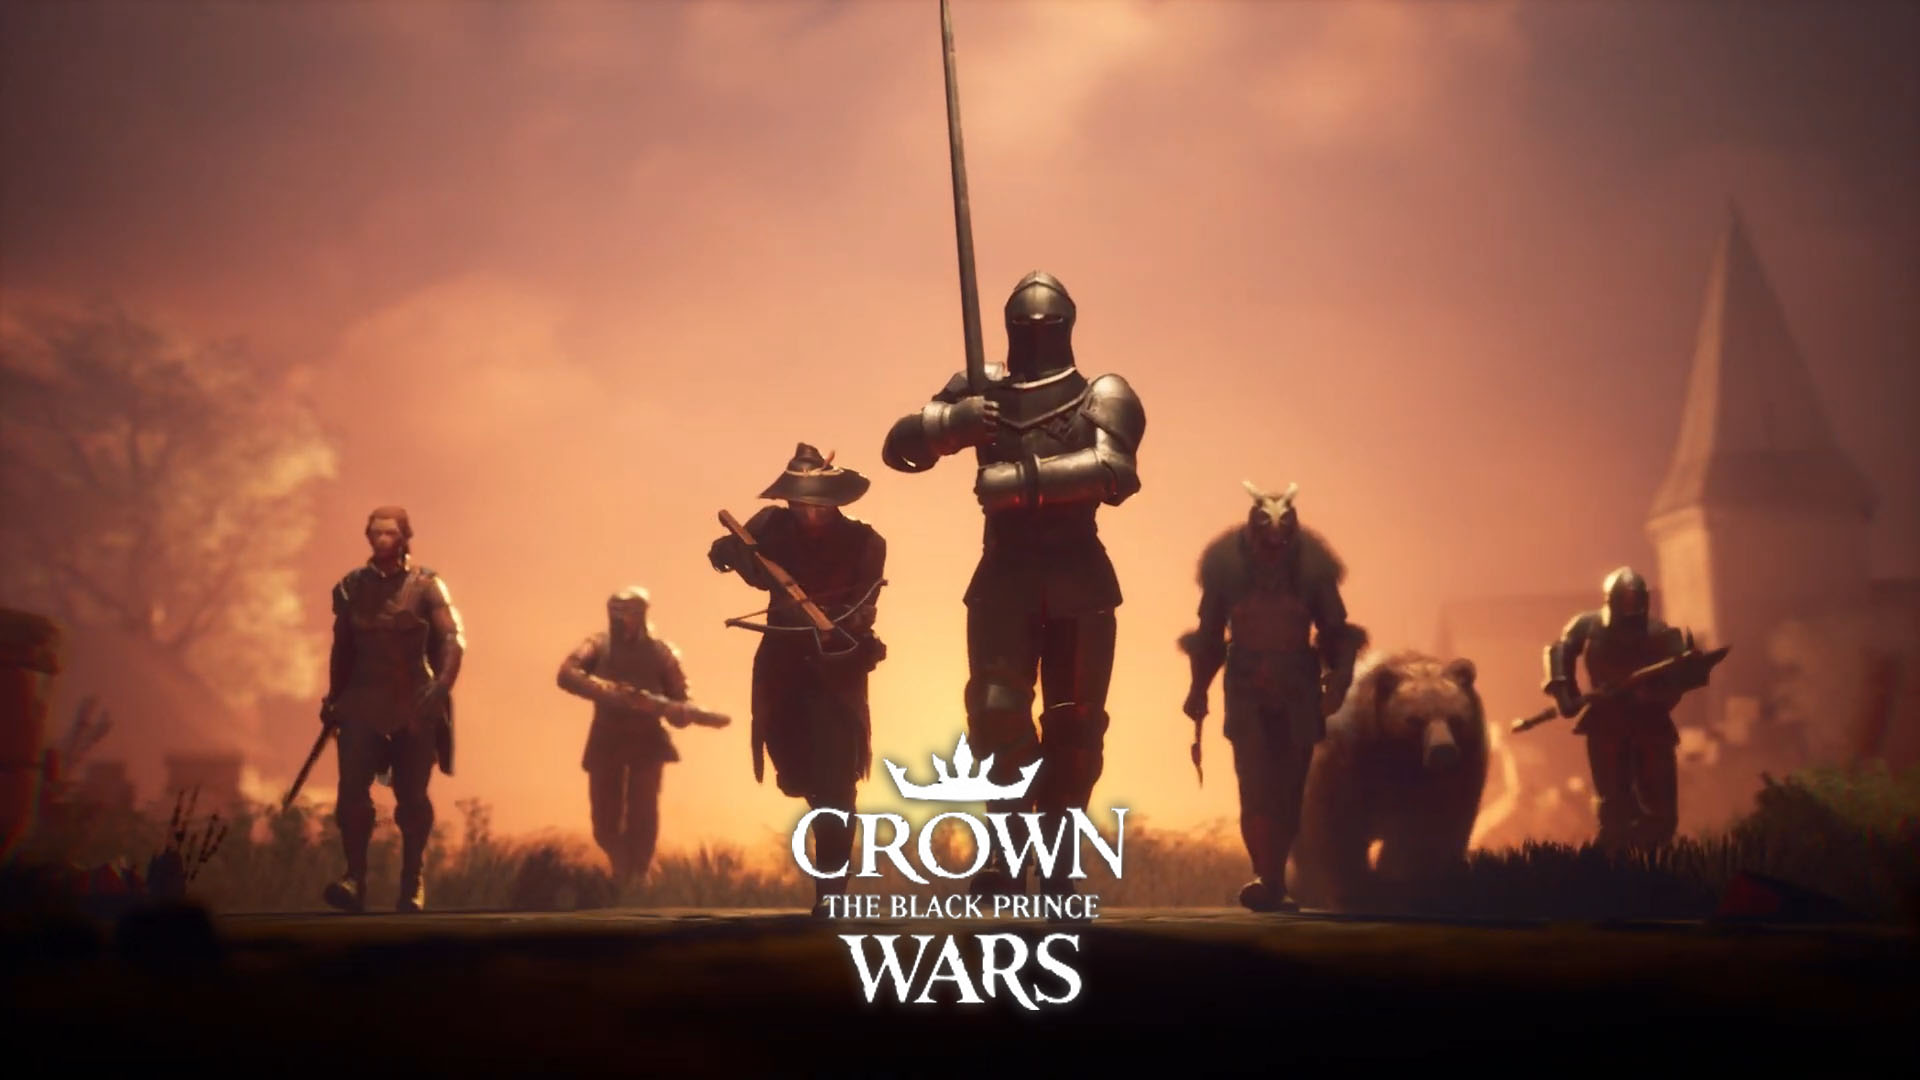 Hundred Years War strategy game Crown Wars: The Black Prince announced